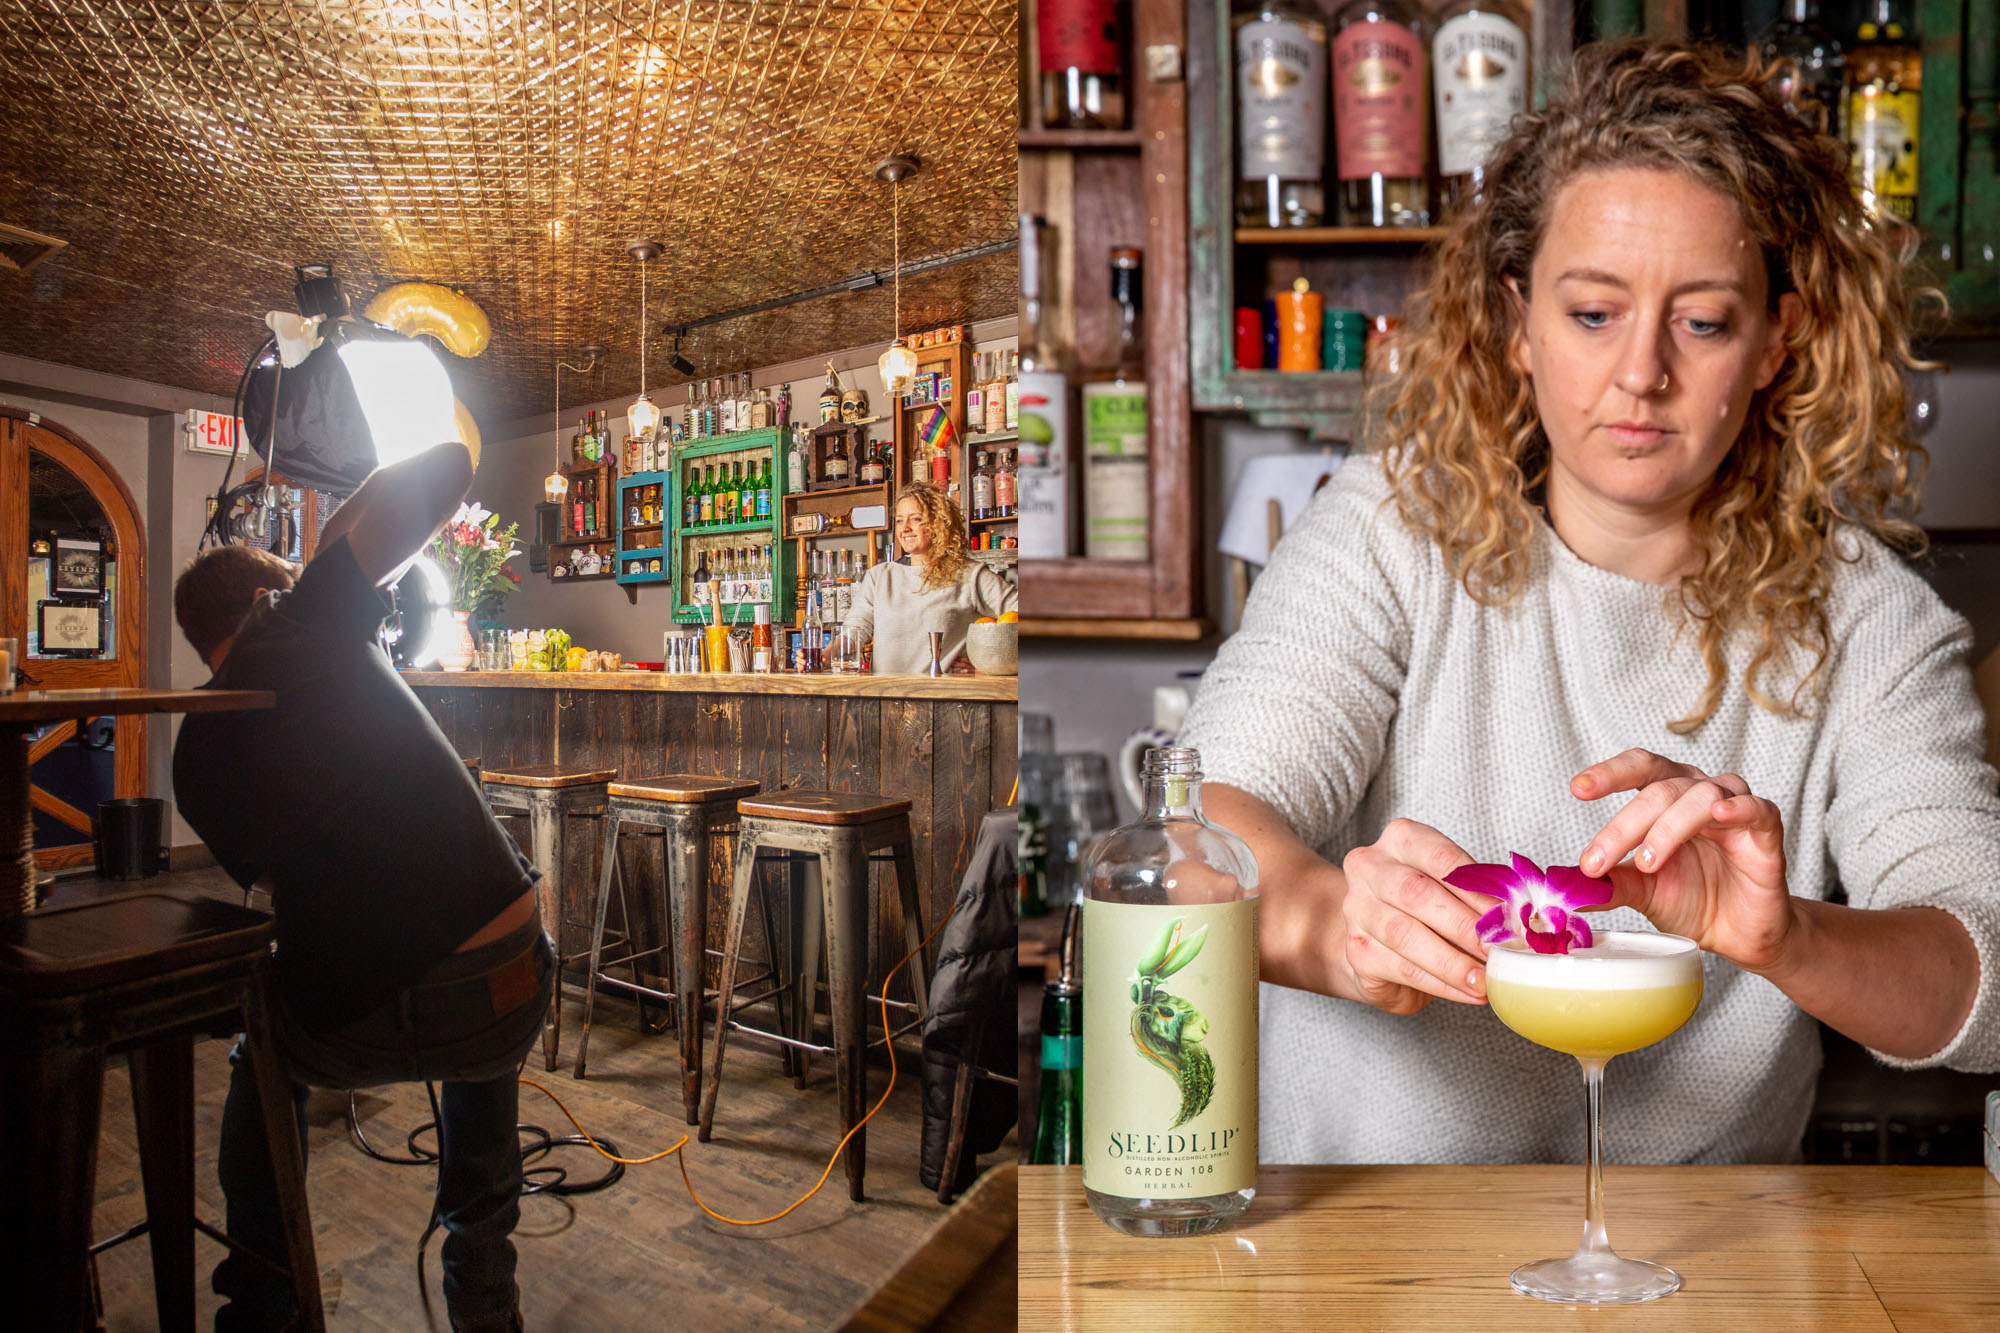 A bartender serving a cocktail and a behind the scenes of that photograph being made